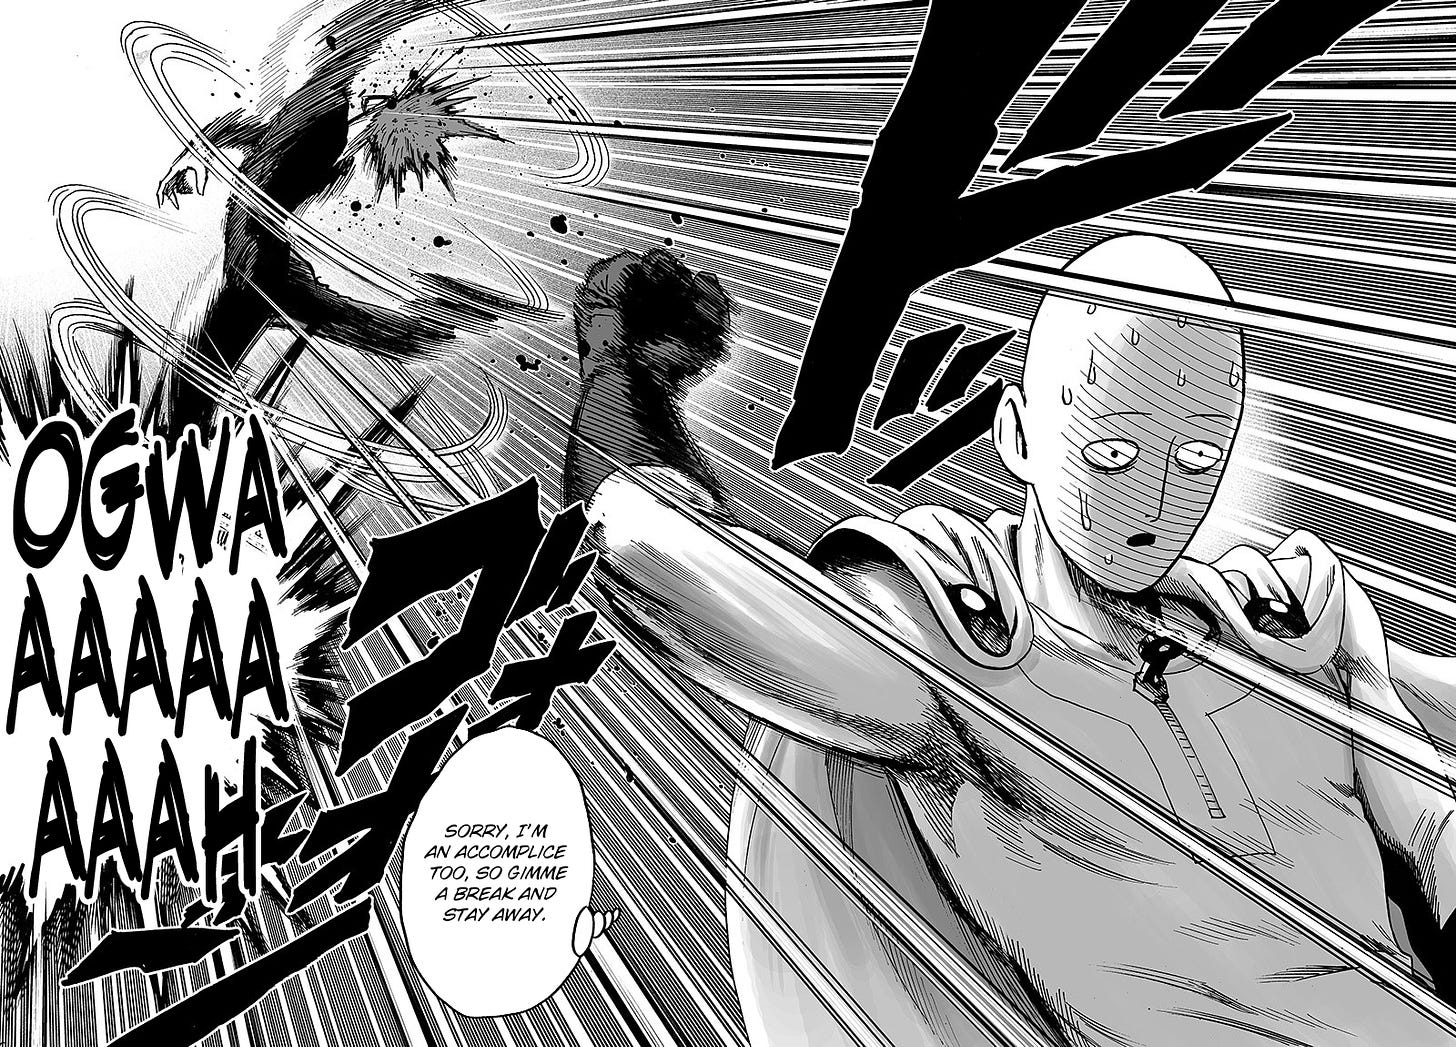 Understand and buy one punch man full manga> OFF-71%